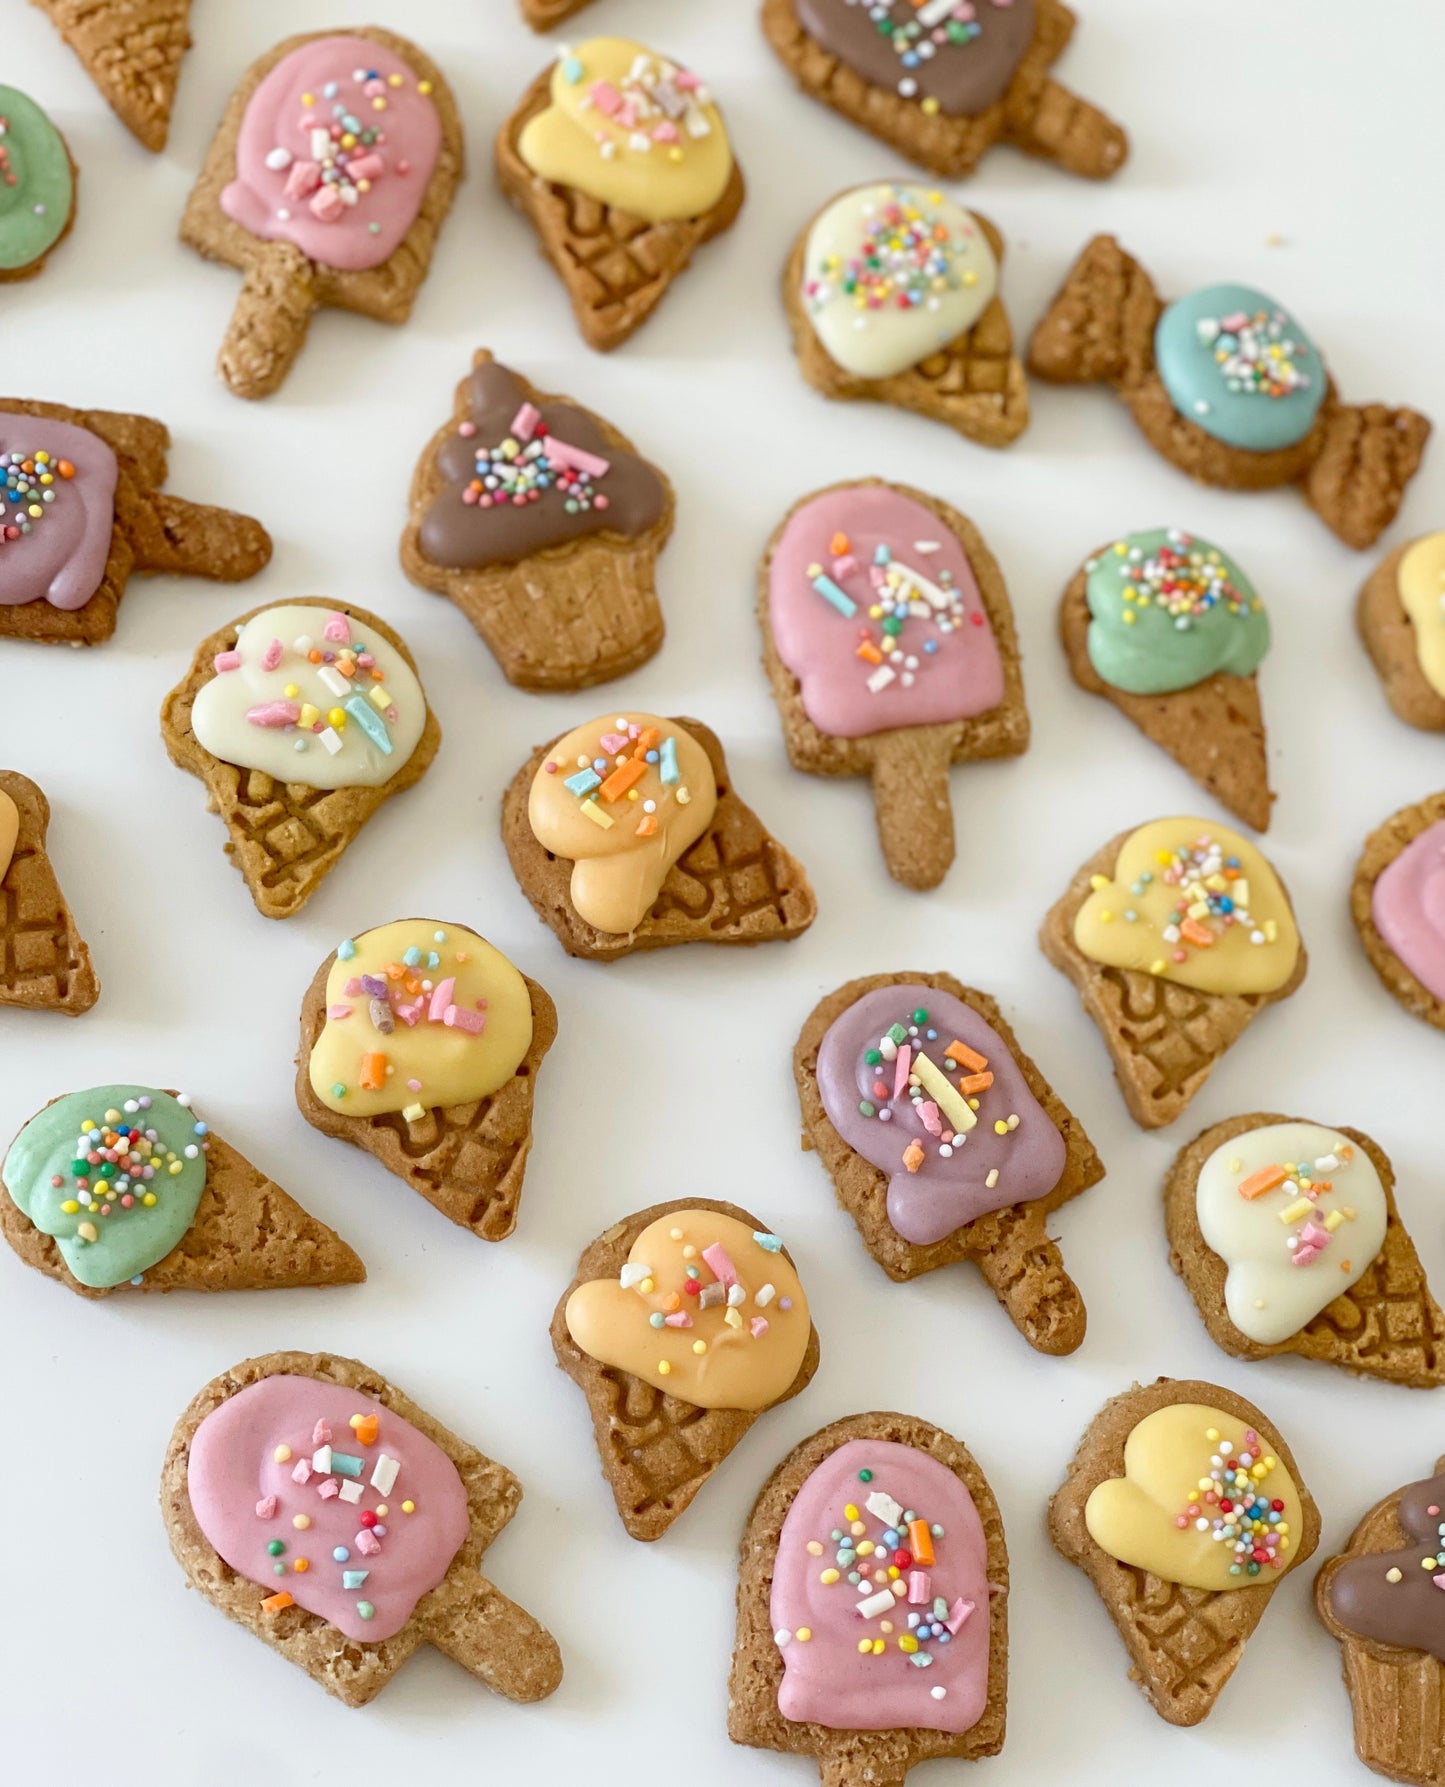 Party mix cookies (160g)